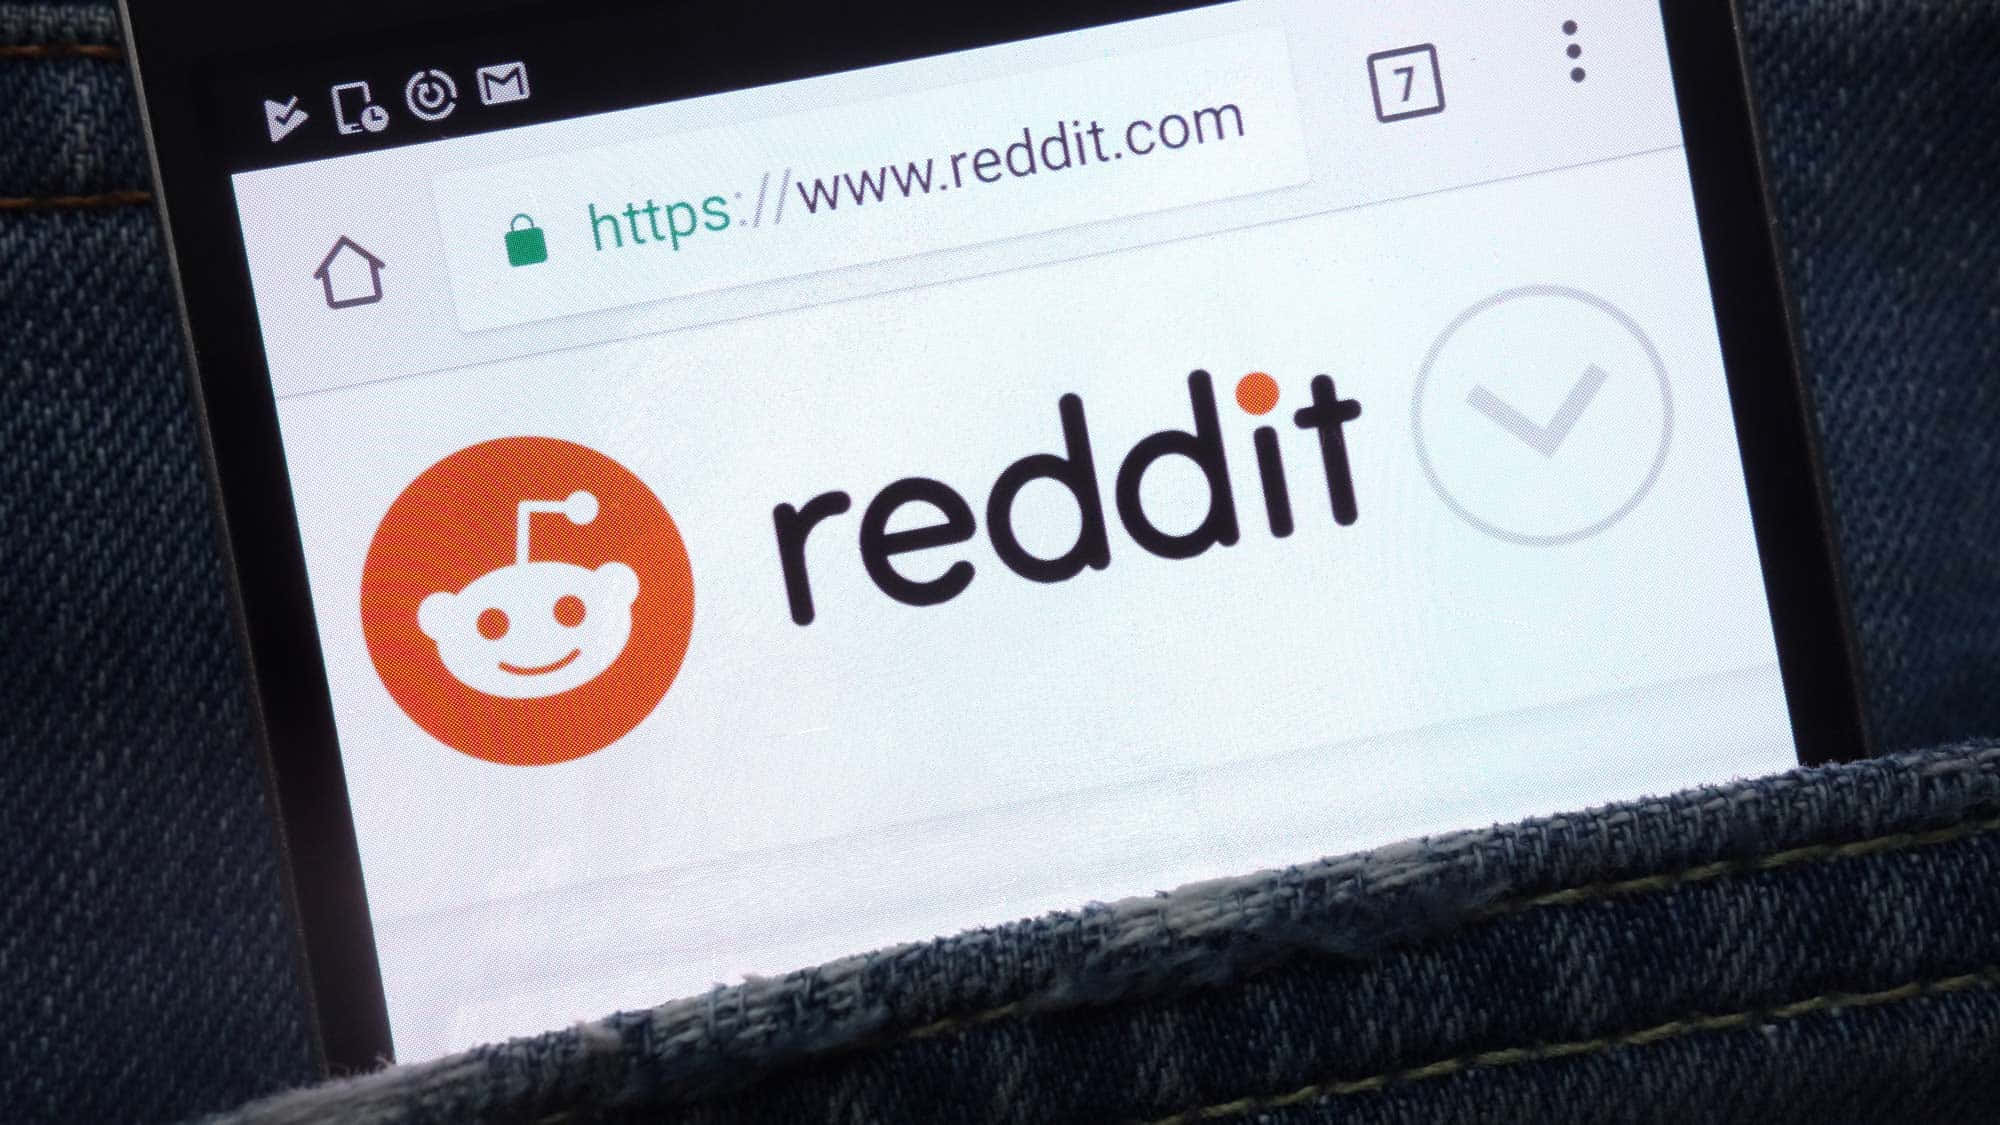 Get connected with Reddit